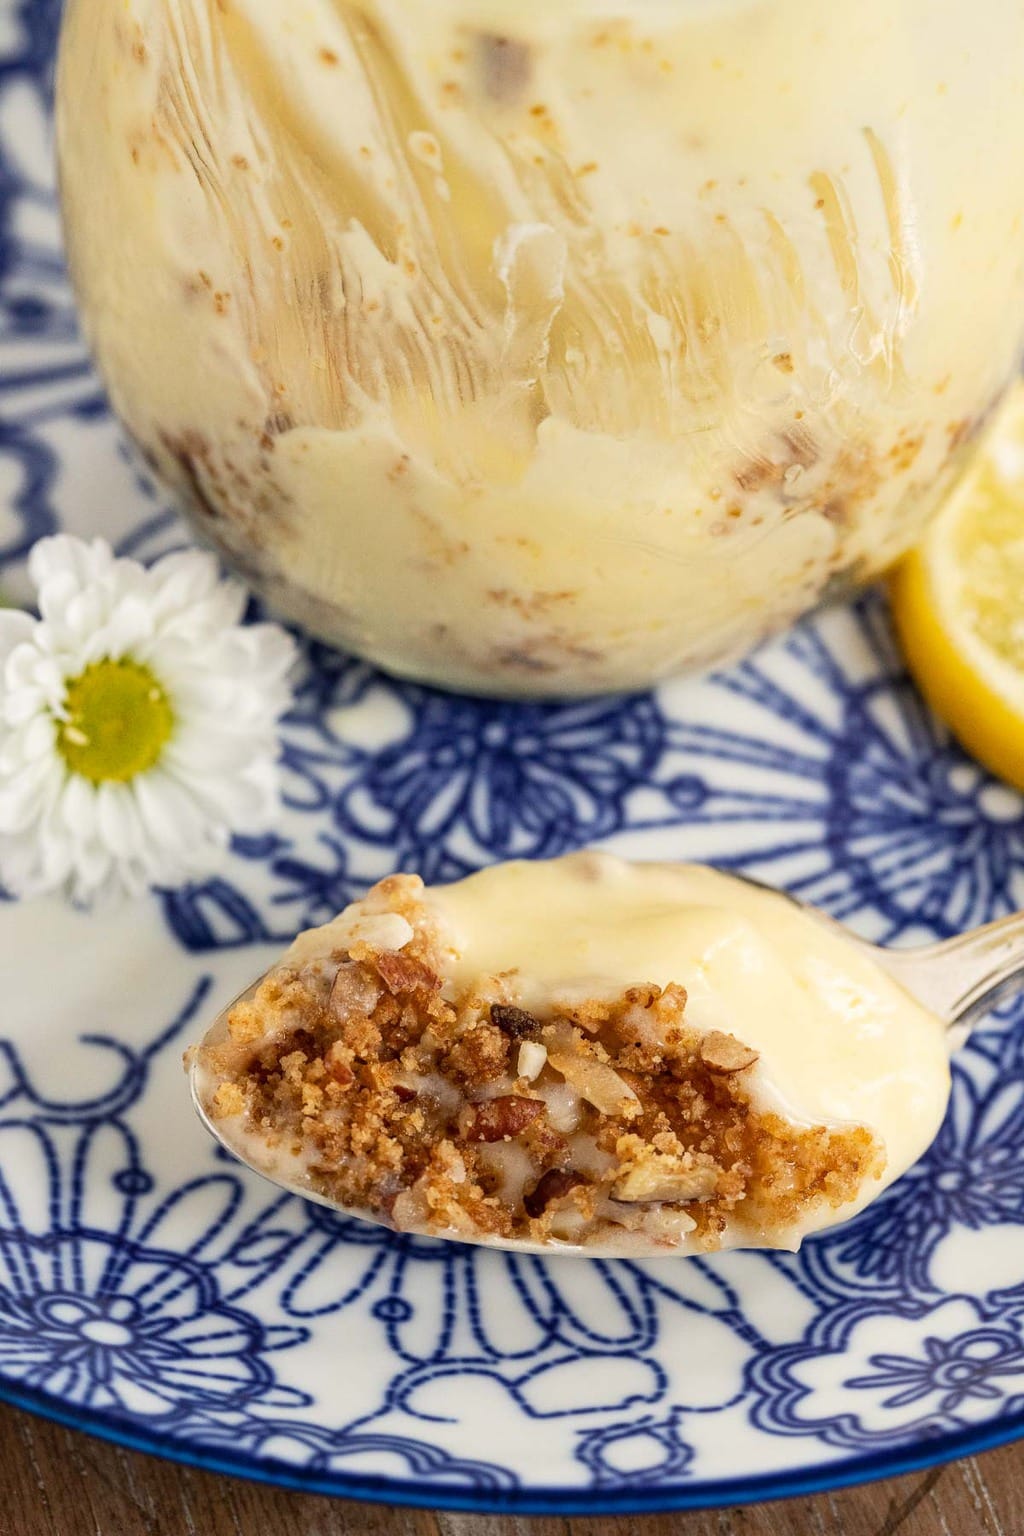 Closeup of a spoonful of Easy Lemon Curd Mousse in front of a jar of the same on a blue and white patterned plate.